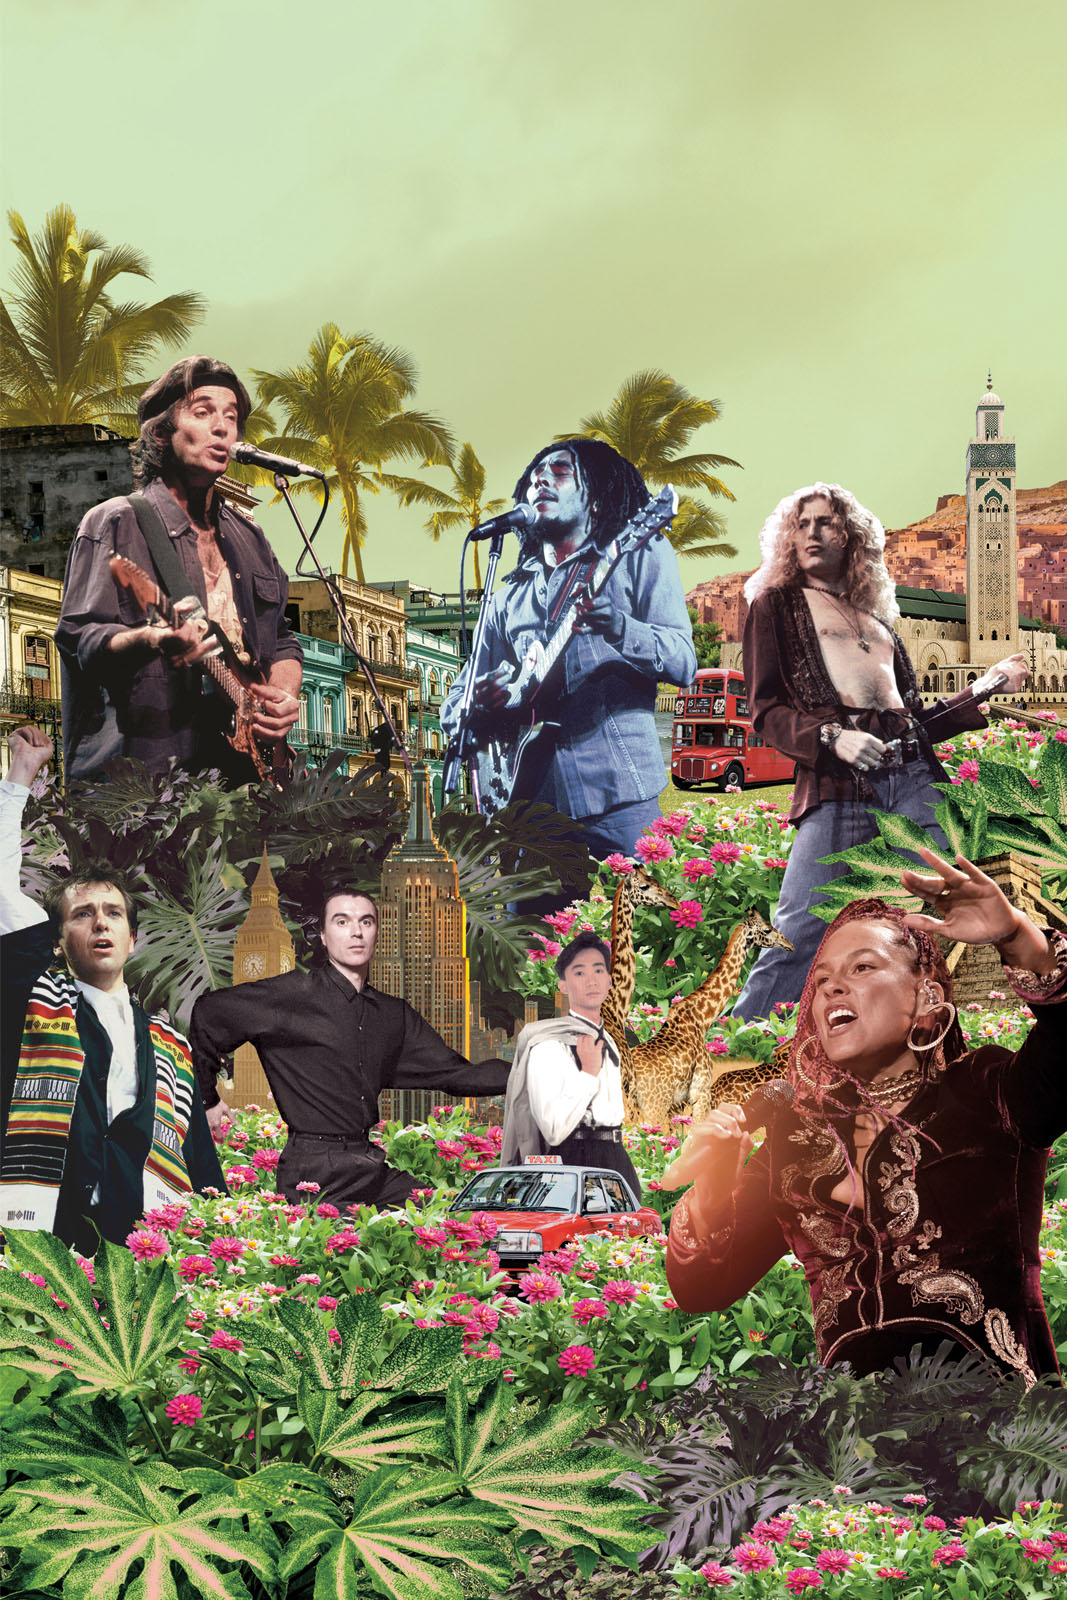 16 Musical travellers